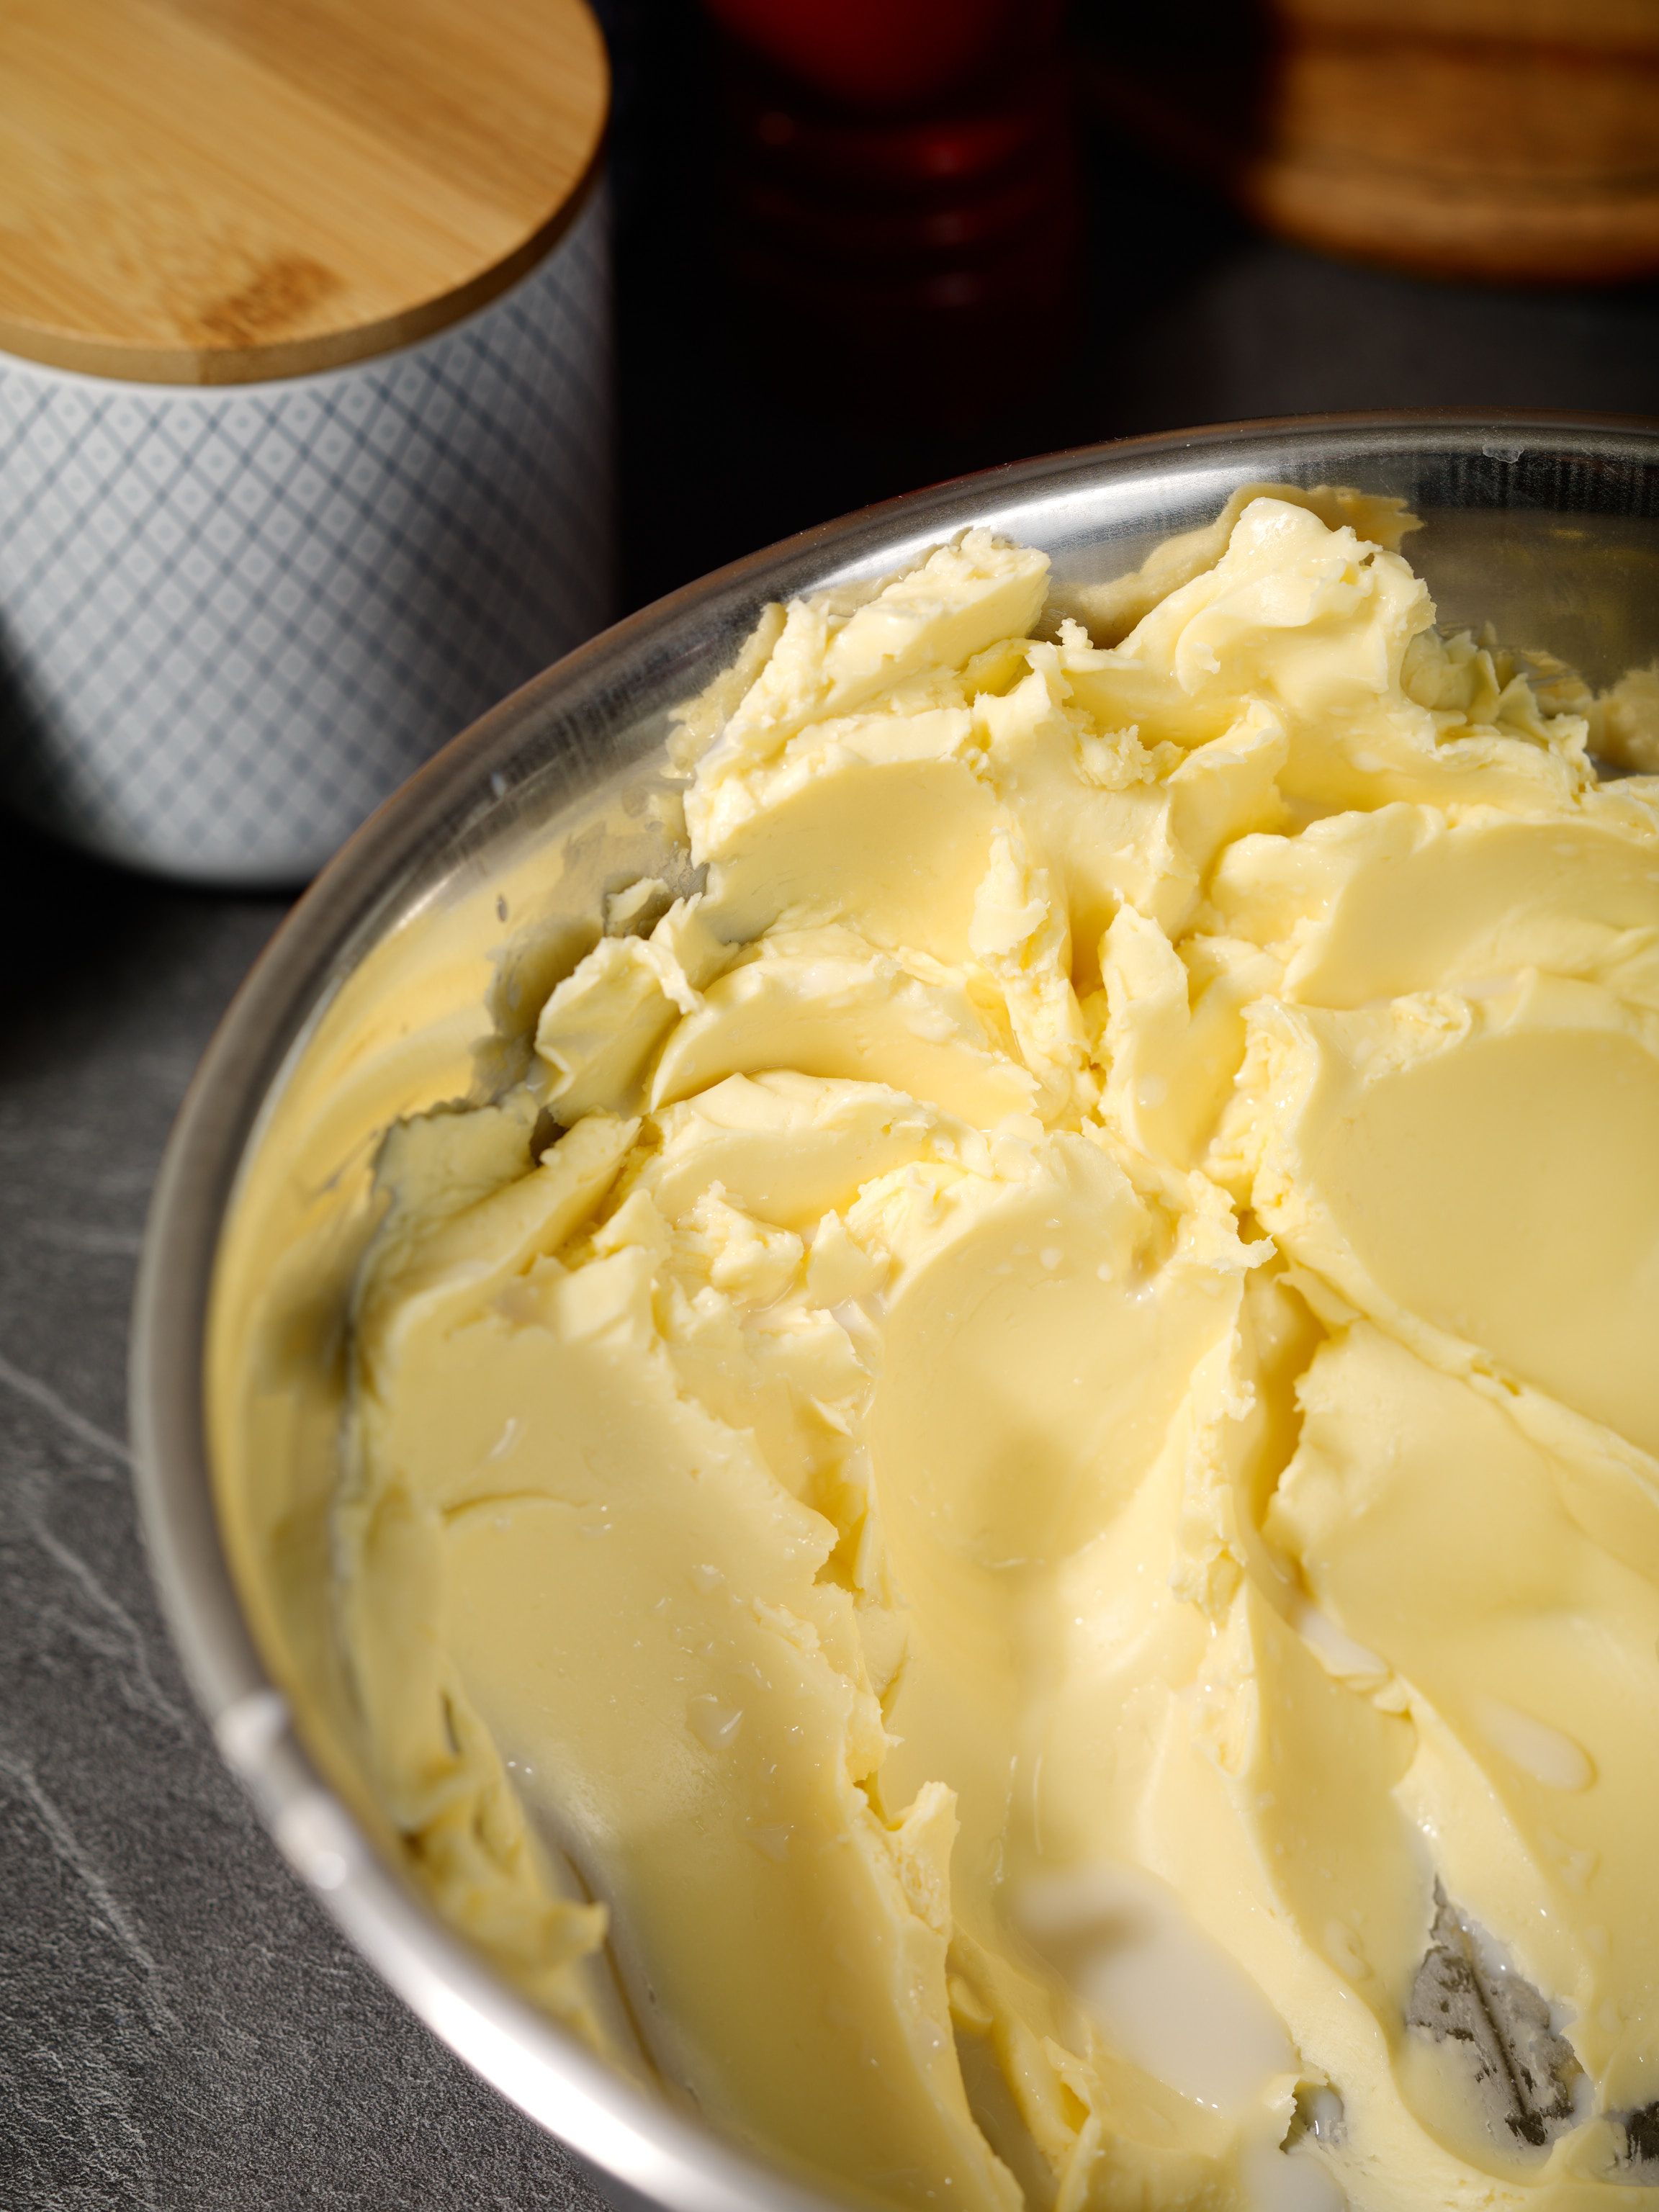 Butter in the process of being kneaded with visible drops of buttermilk